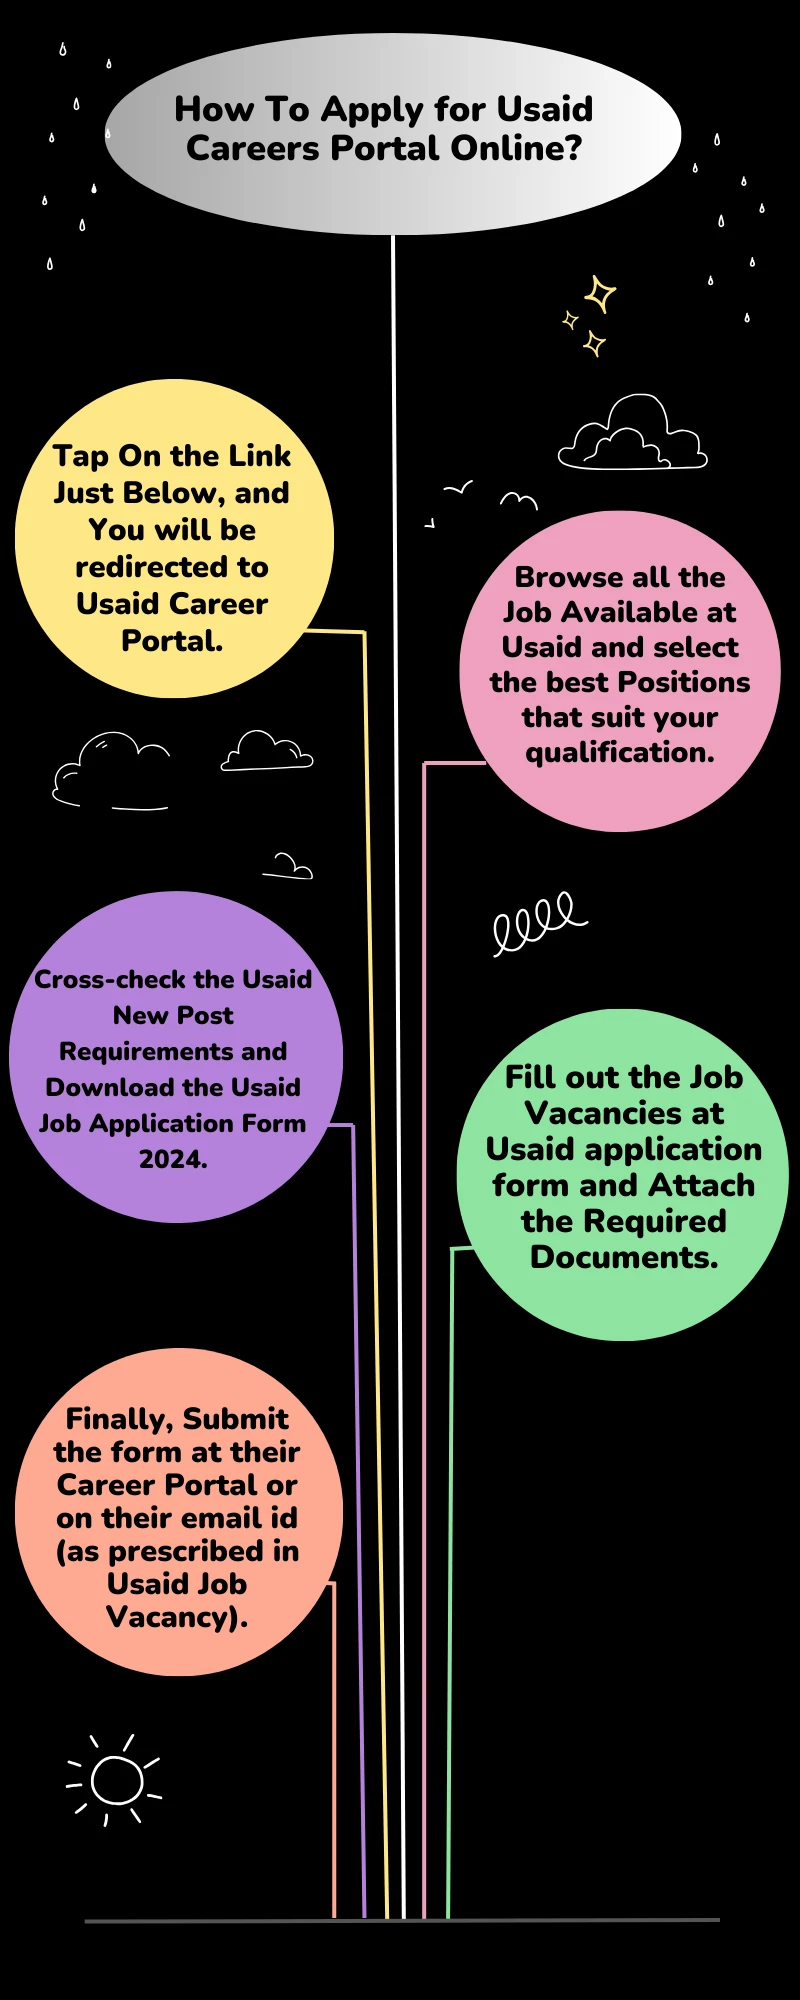 How To Apply for Usaid Careers Portal Online?